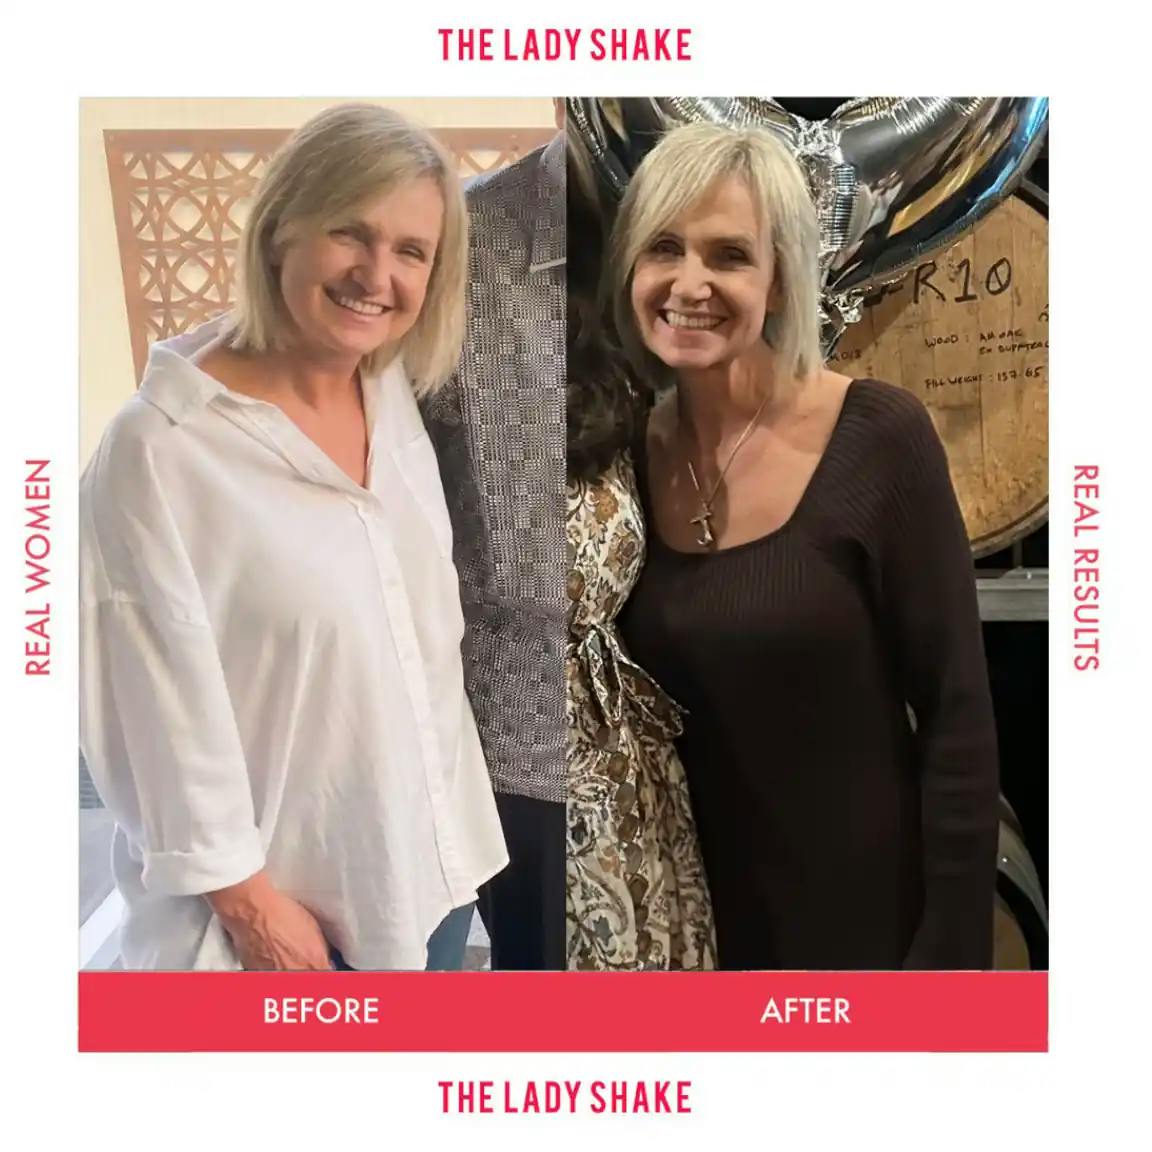 Jacqui lost 14kgs on The Lady Shake!